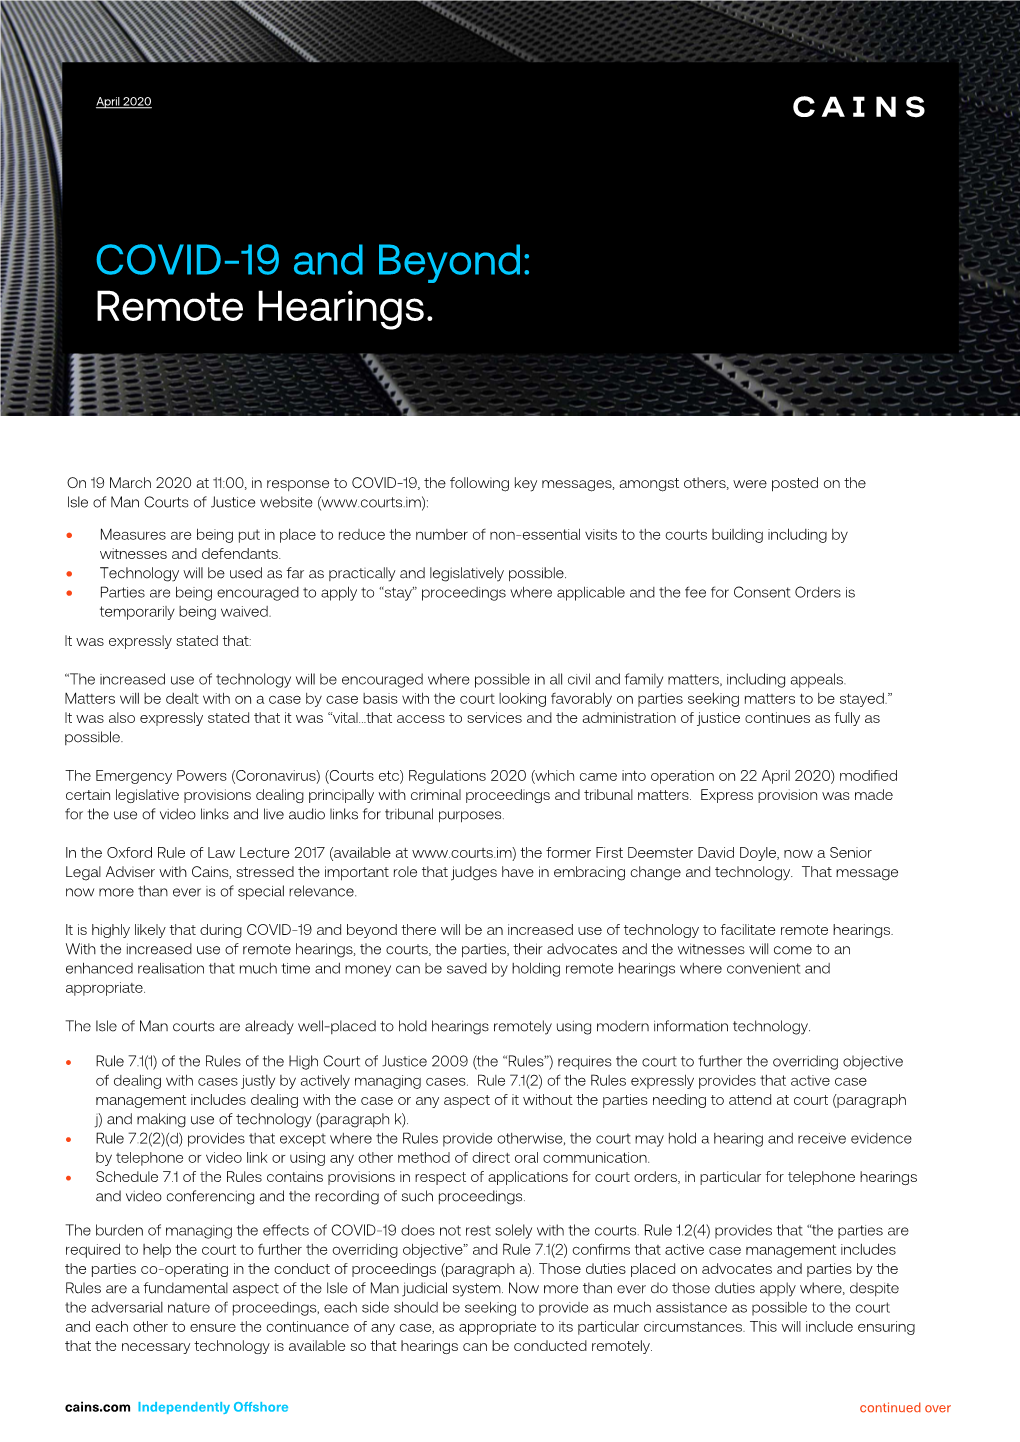 COVID-19 and Beyond: Remote Hearings